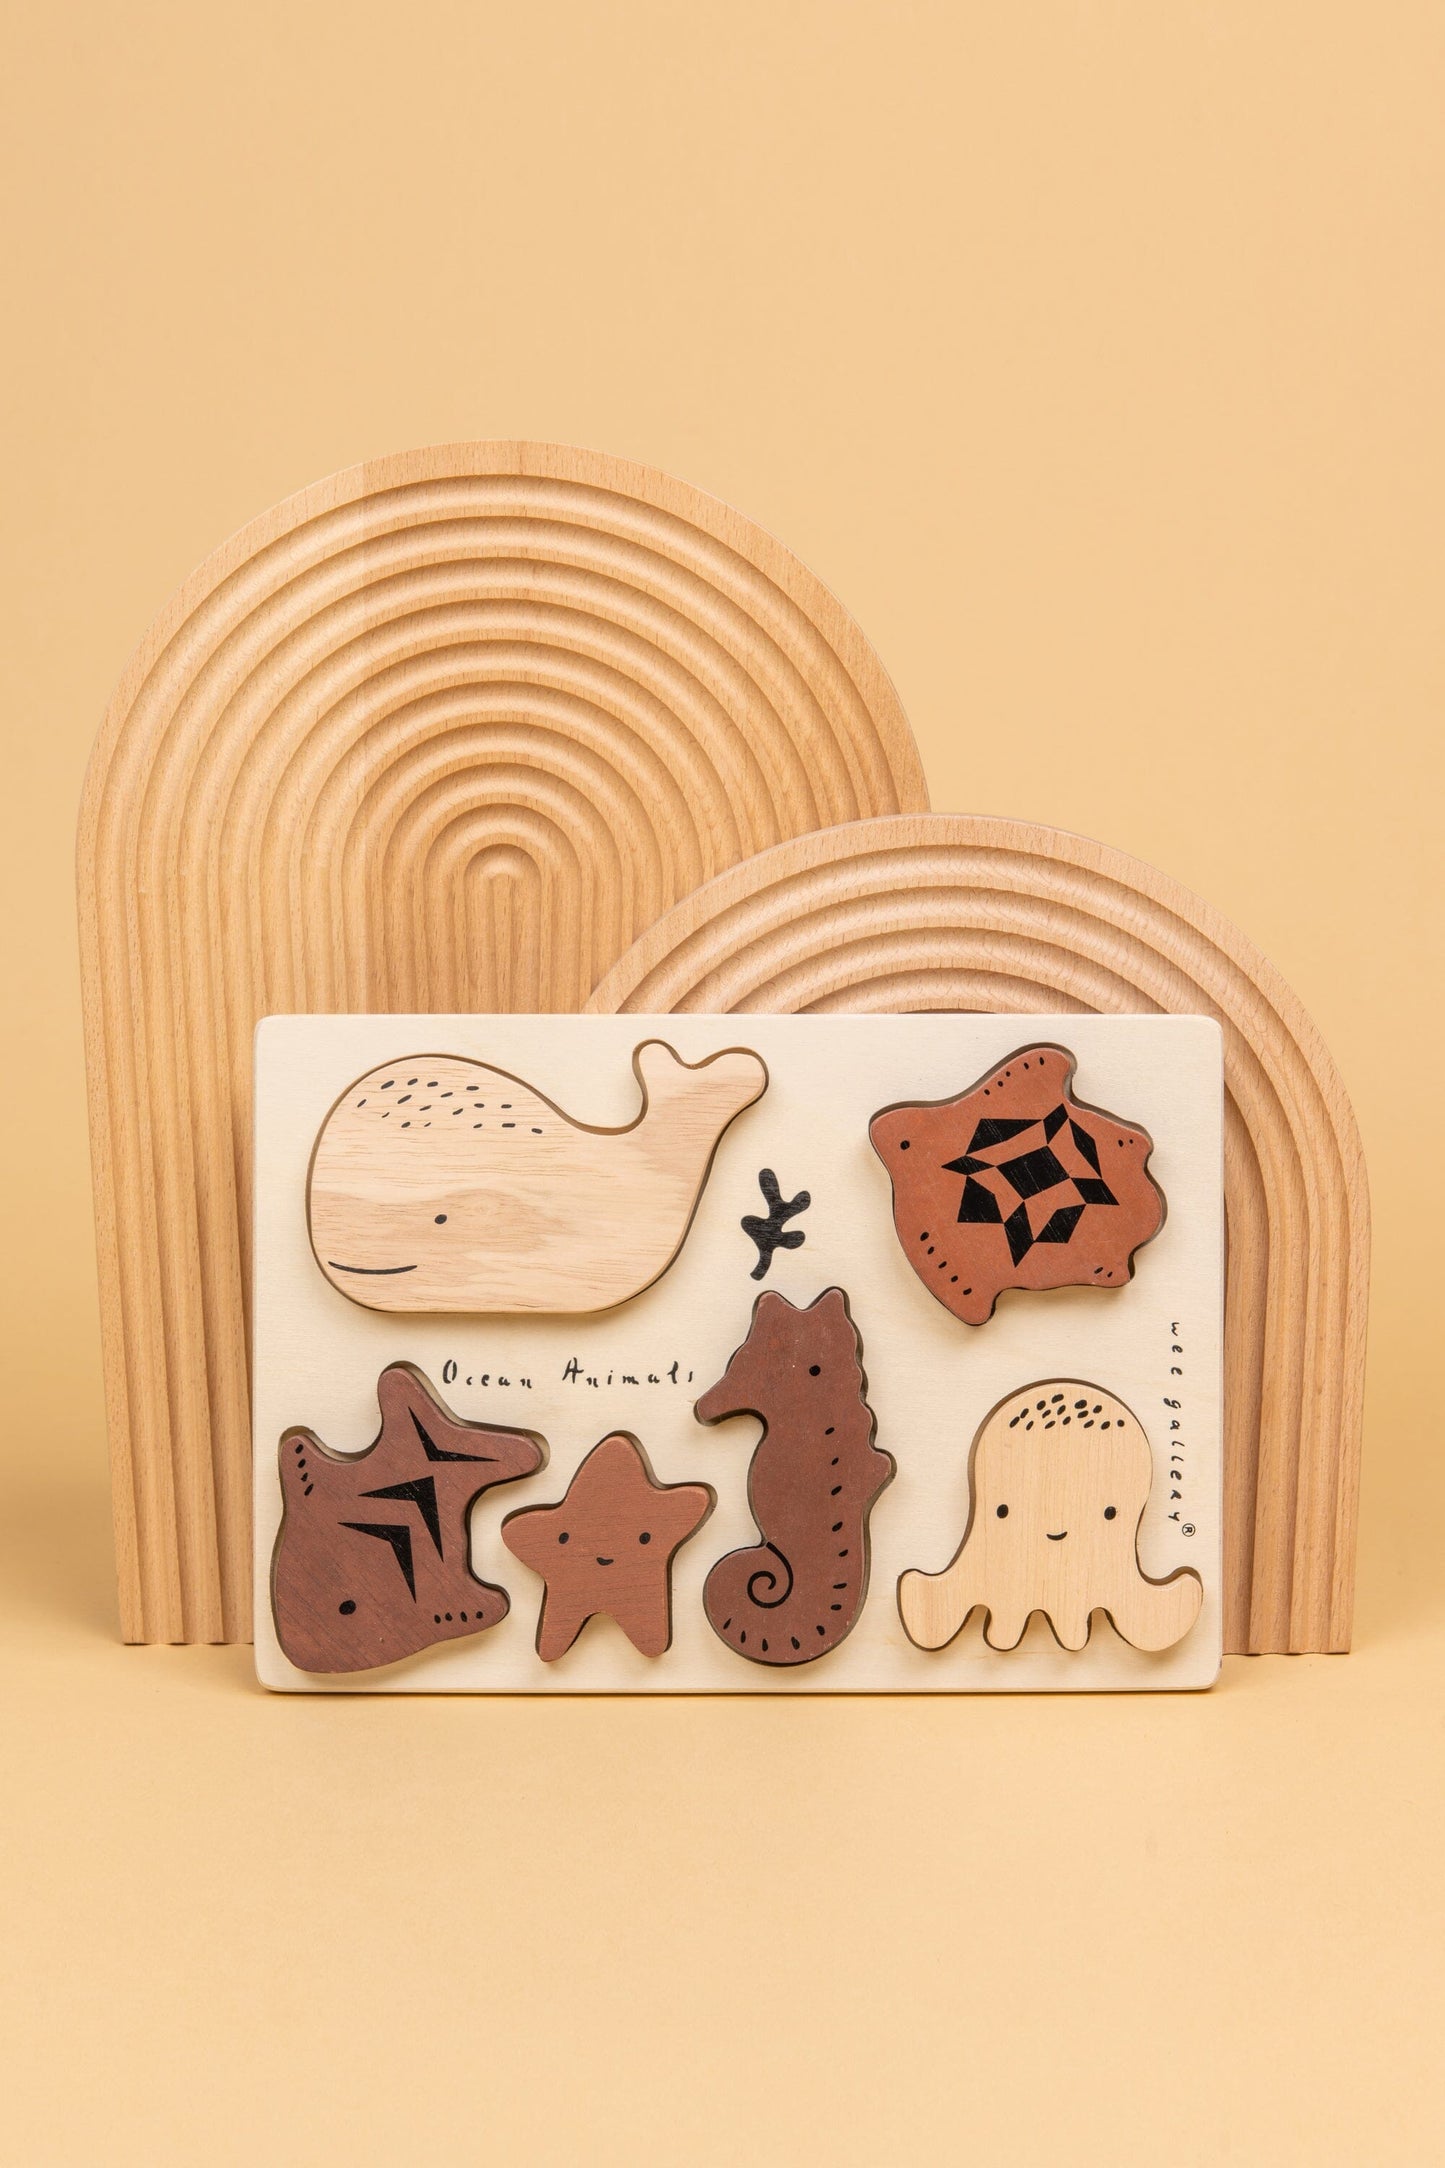 Wooden Tray Puzzle Toys Wee Gallery Ocean 